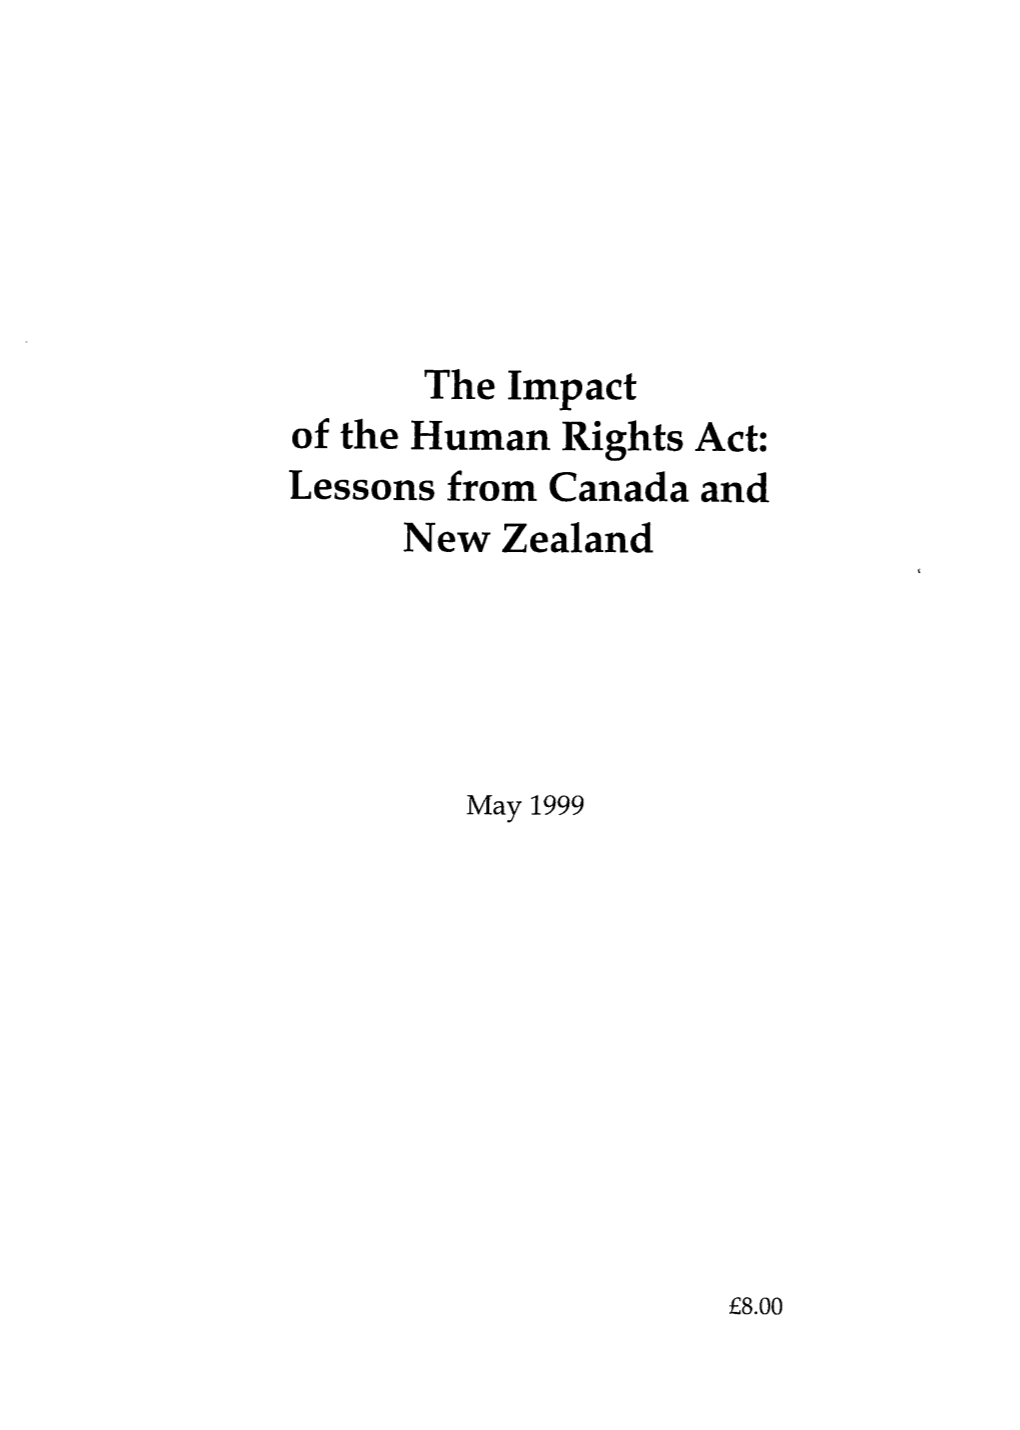 The Impact of the Human Rights Act: Lessons from Canada and New Zealand